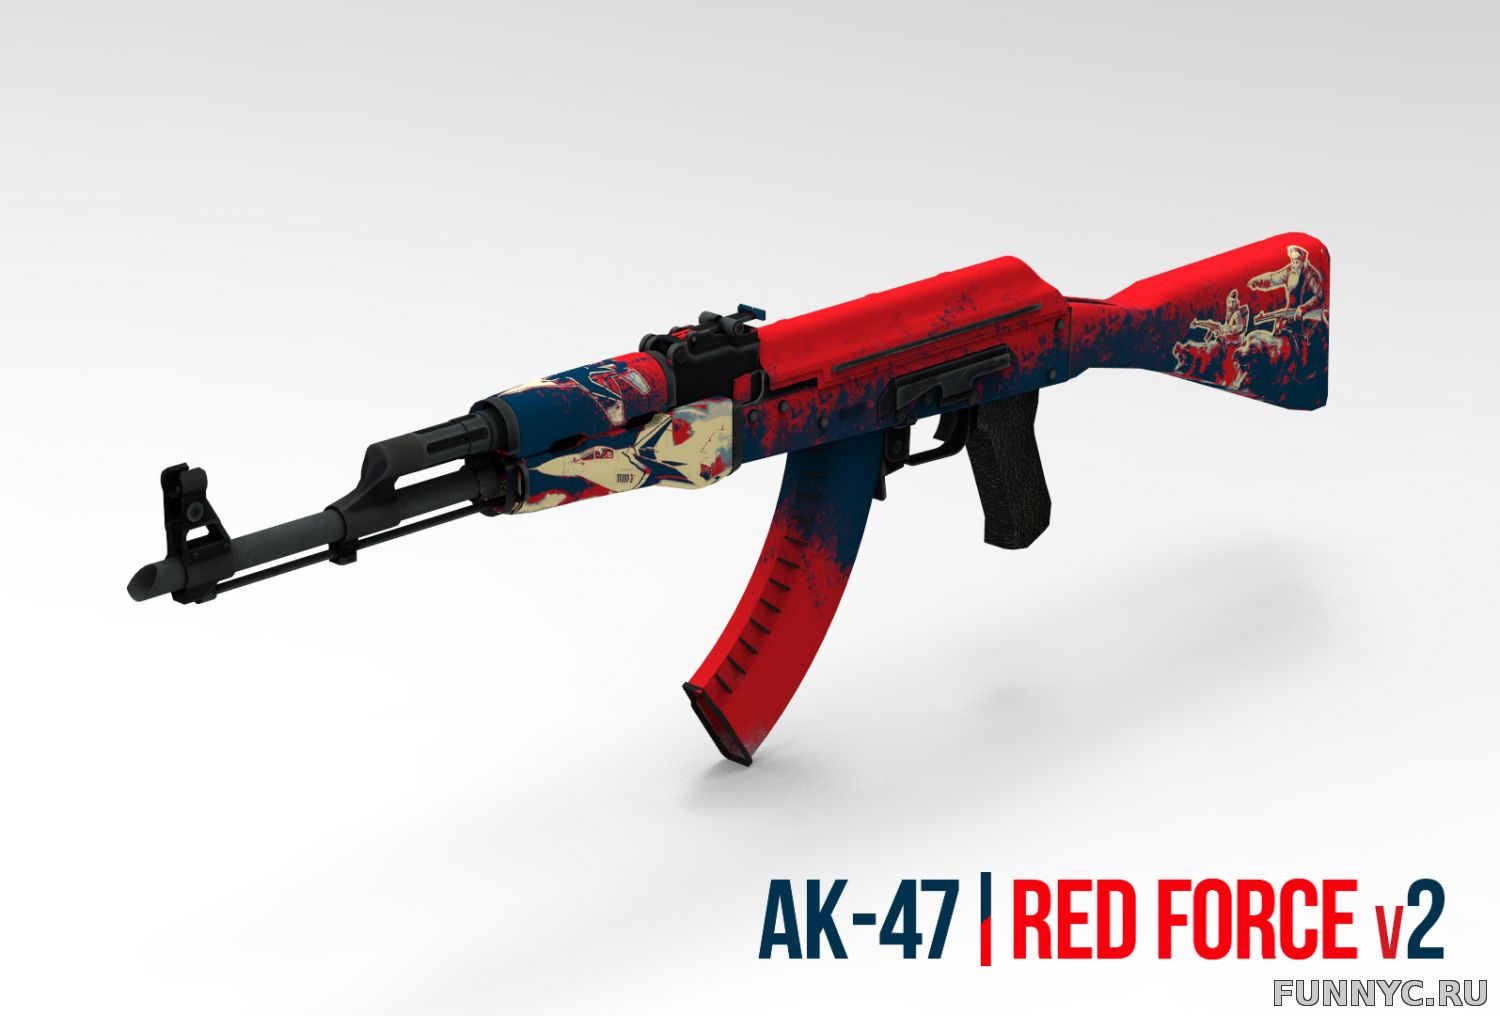 AK-47 RED FORCE V2